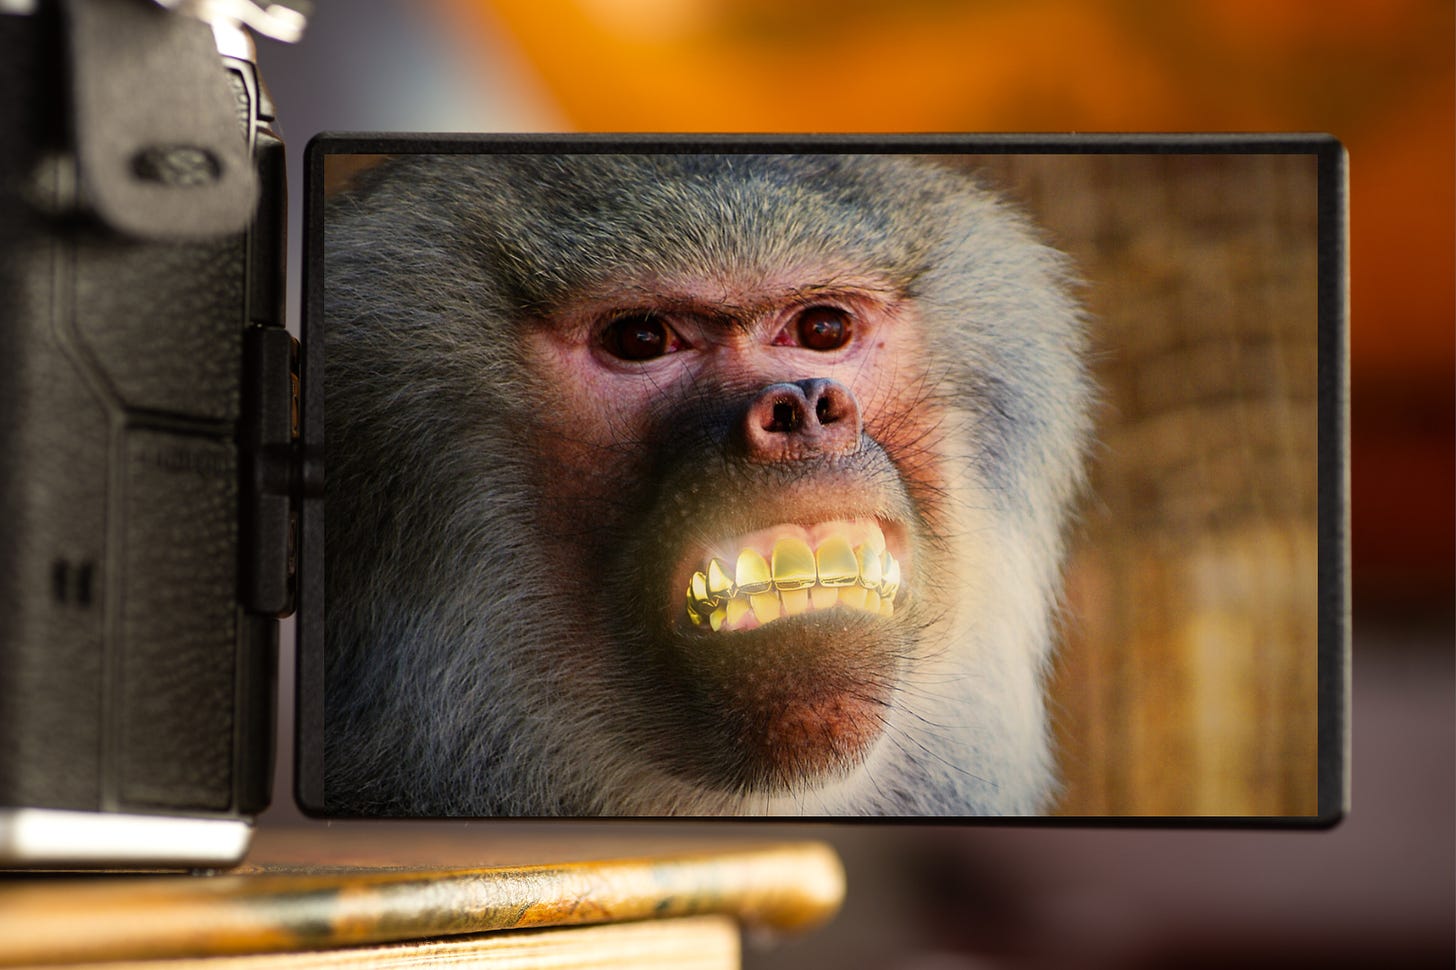 A photo preview of a smiling monkey with golden teeth on a camera screen.